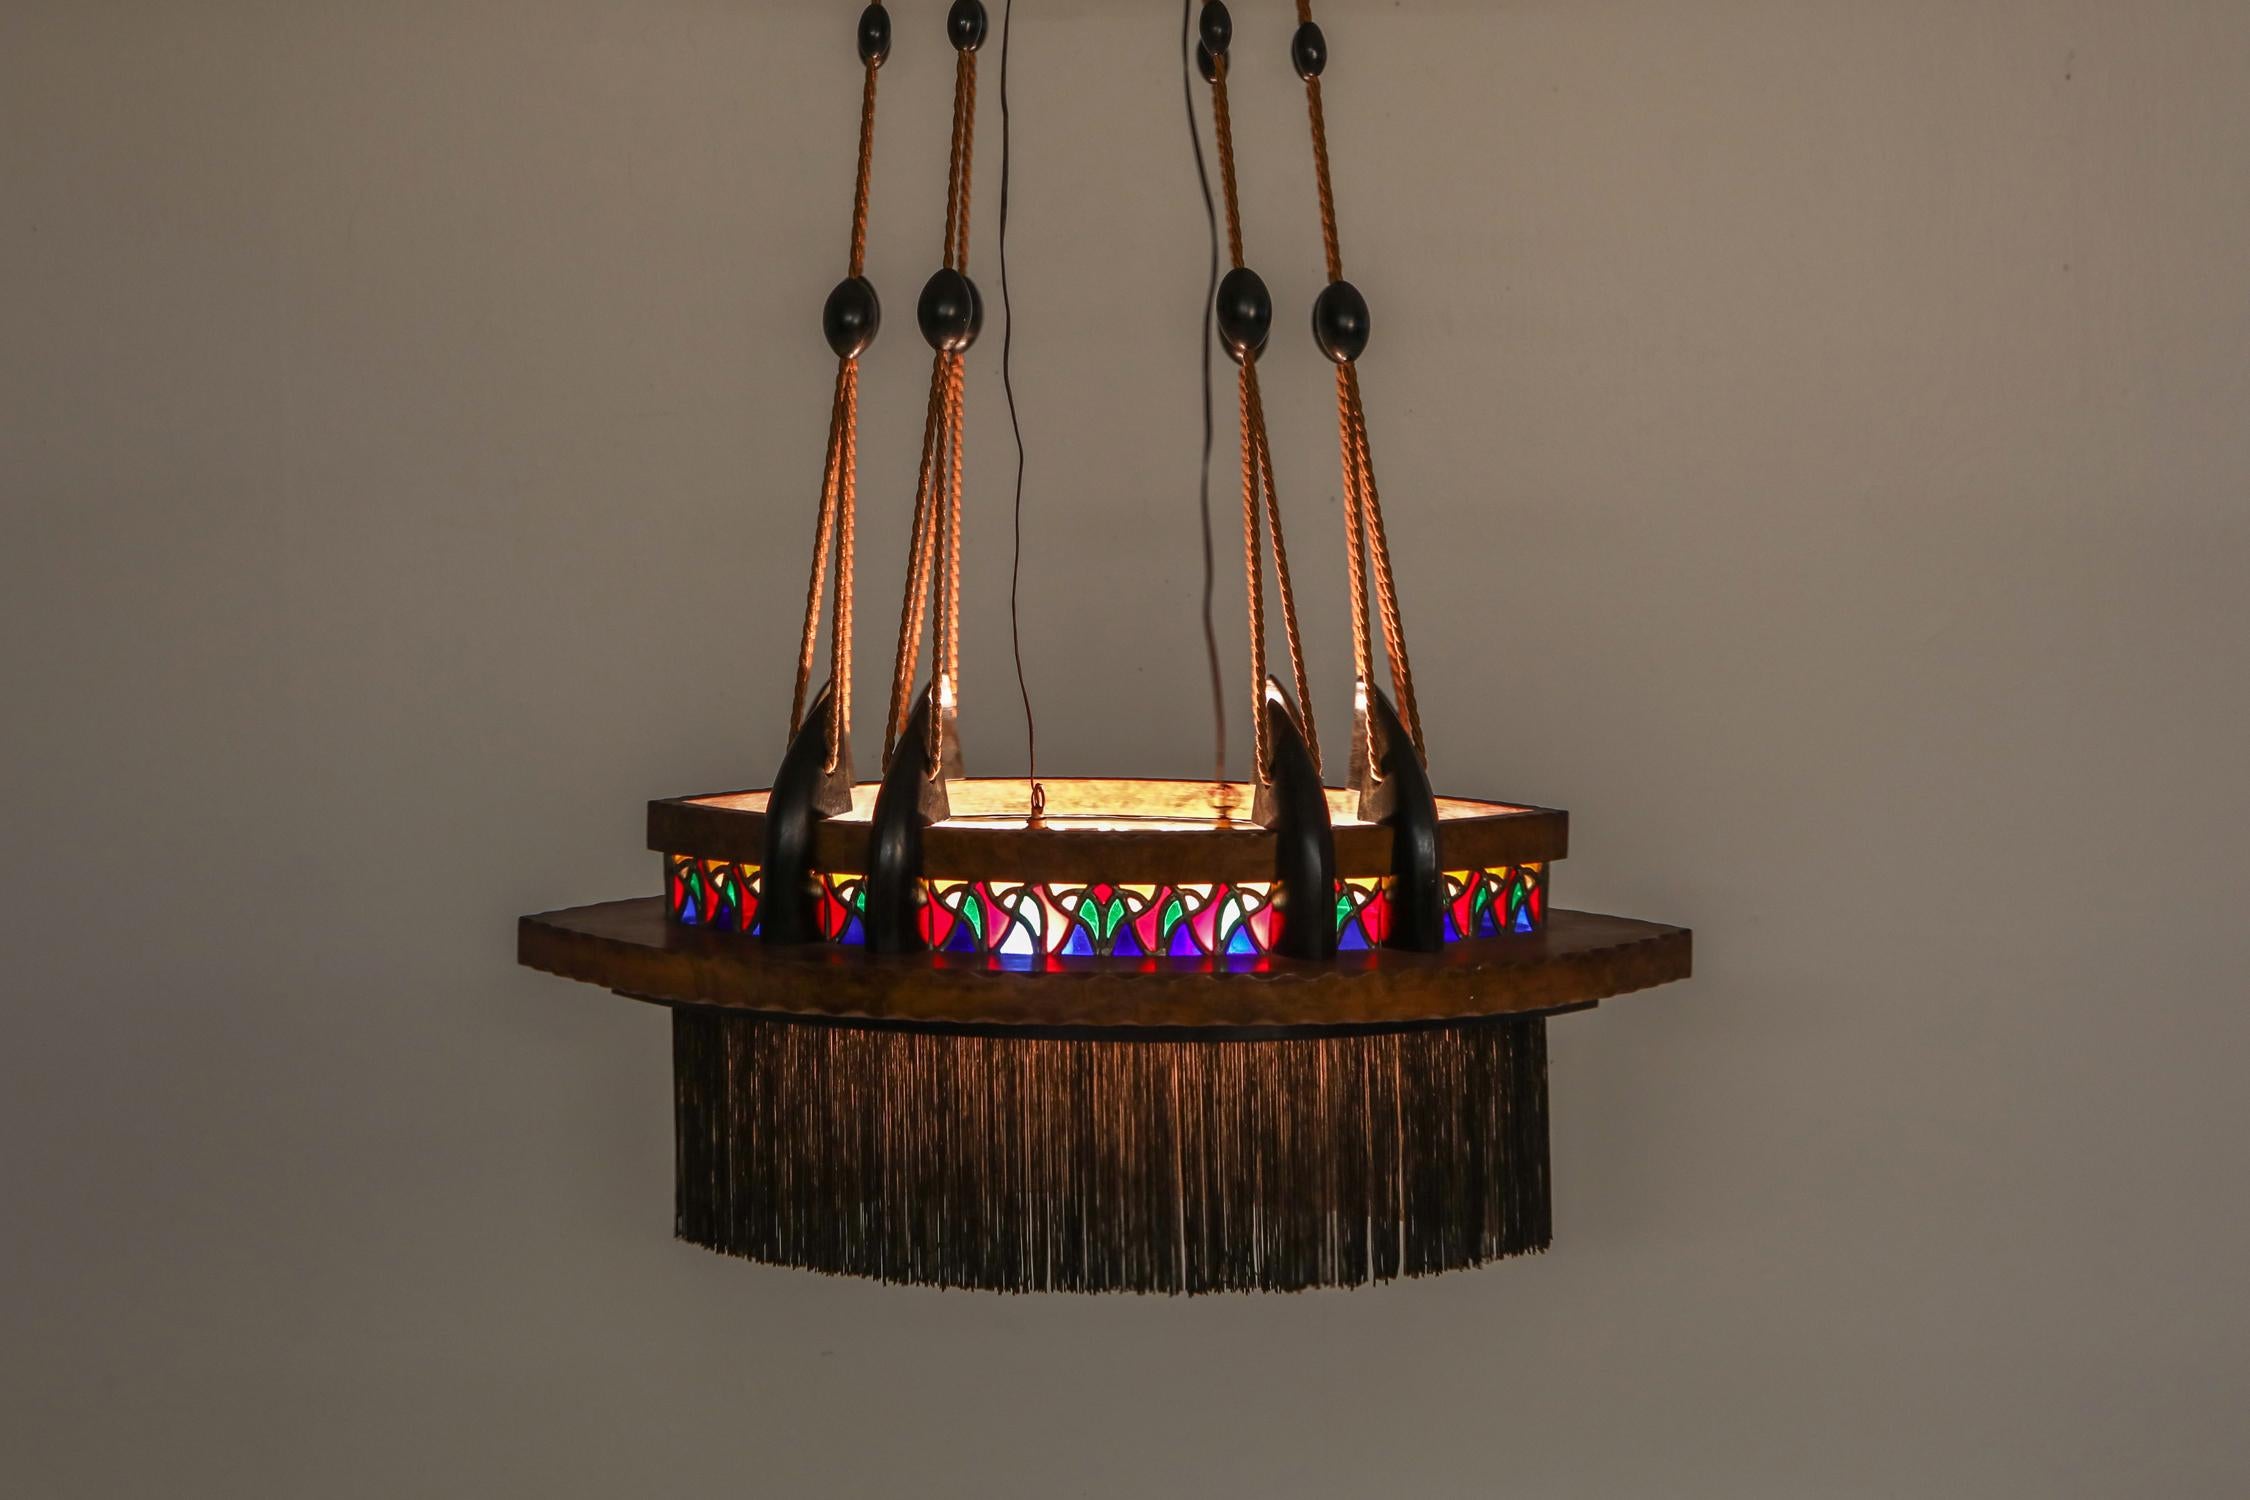 Amsterdam School Chandelier in Ebony, Carved Wood, Glass in Lead and Silk For Sale 6